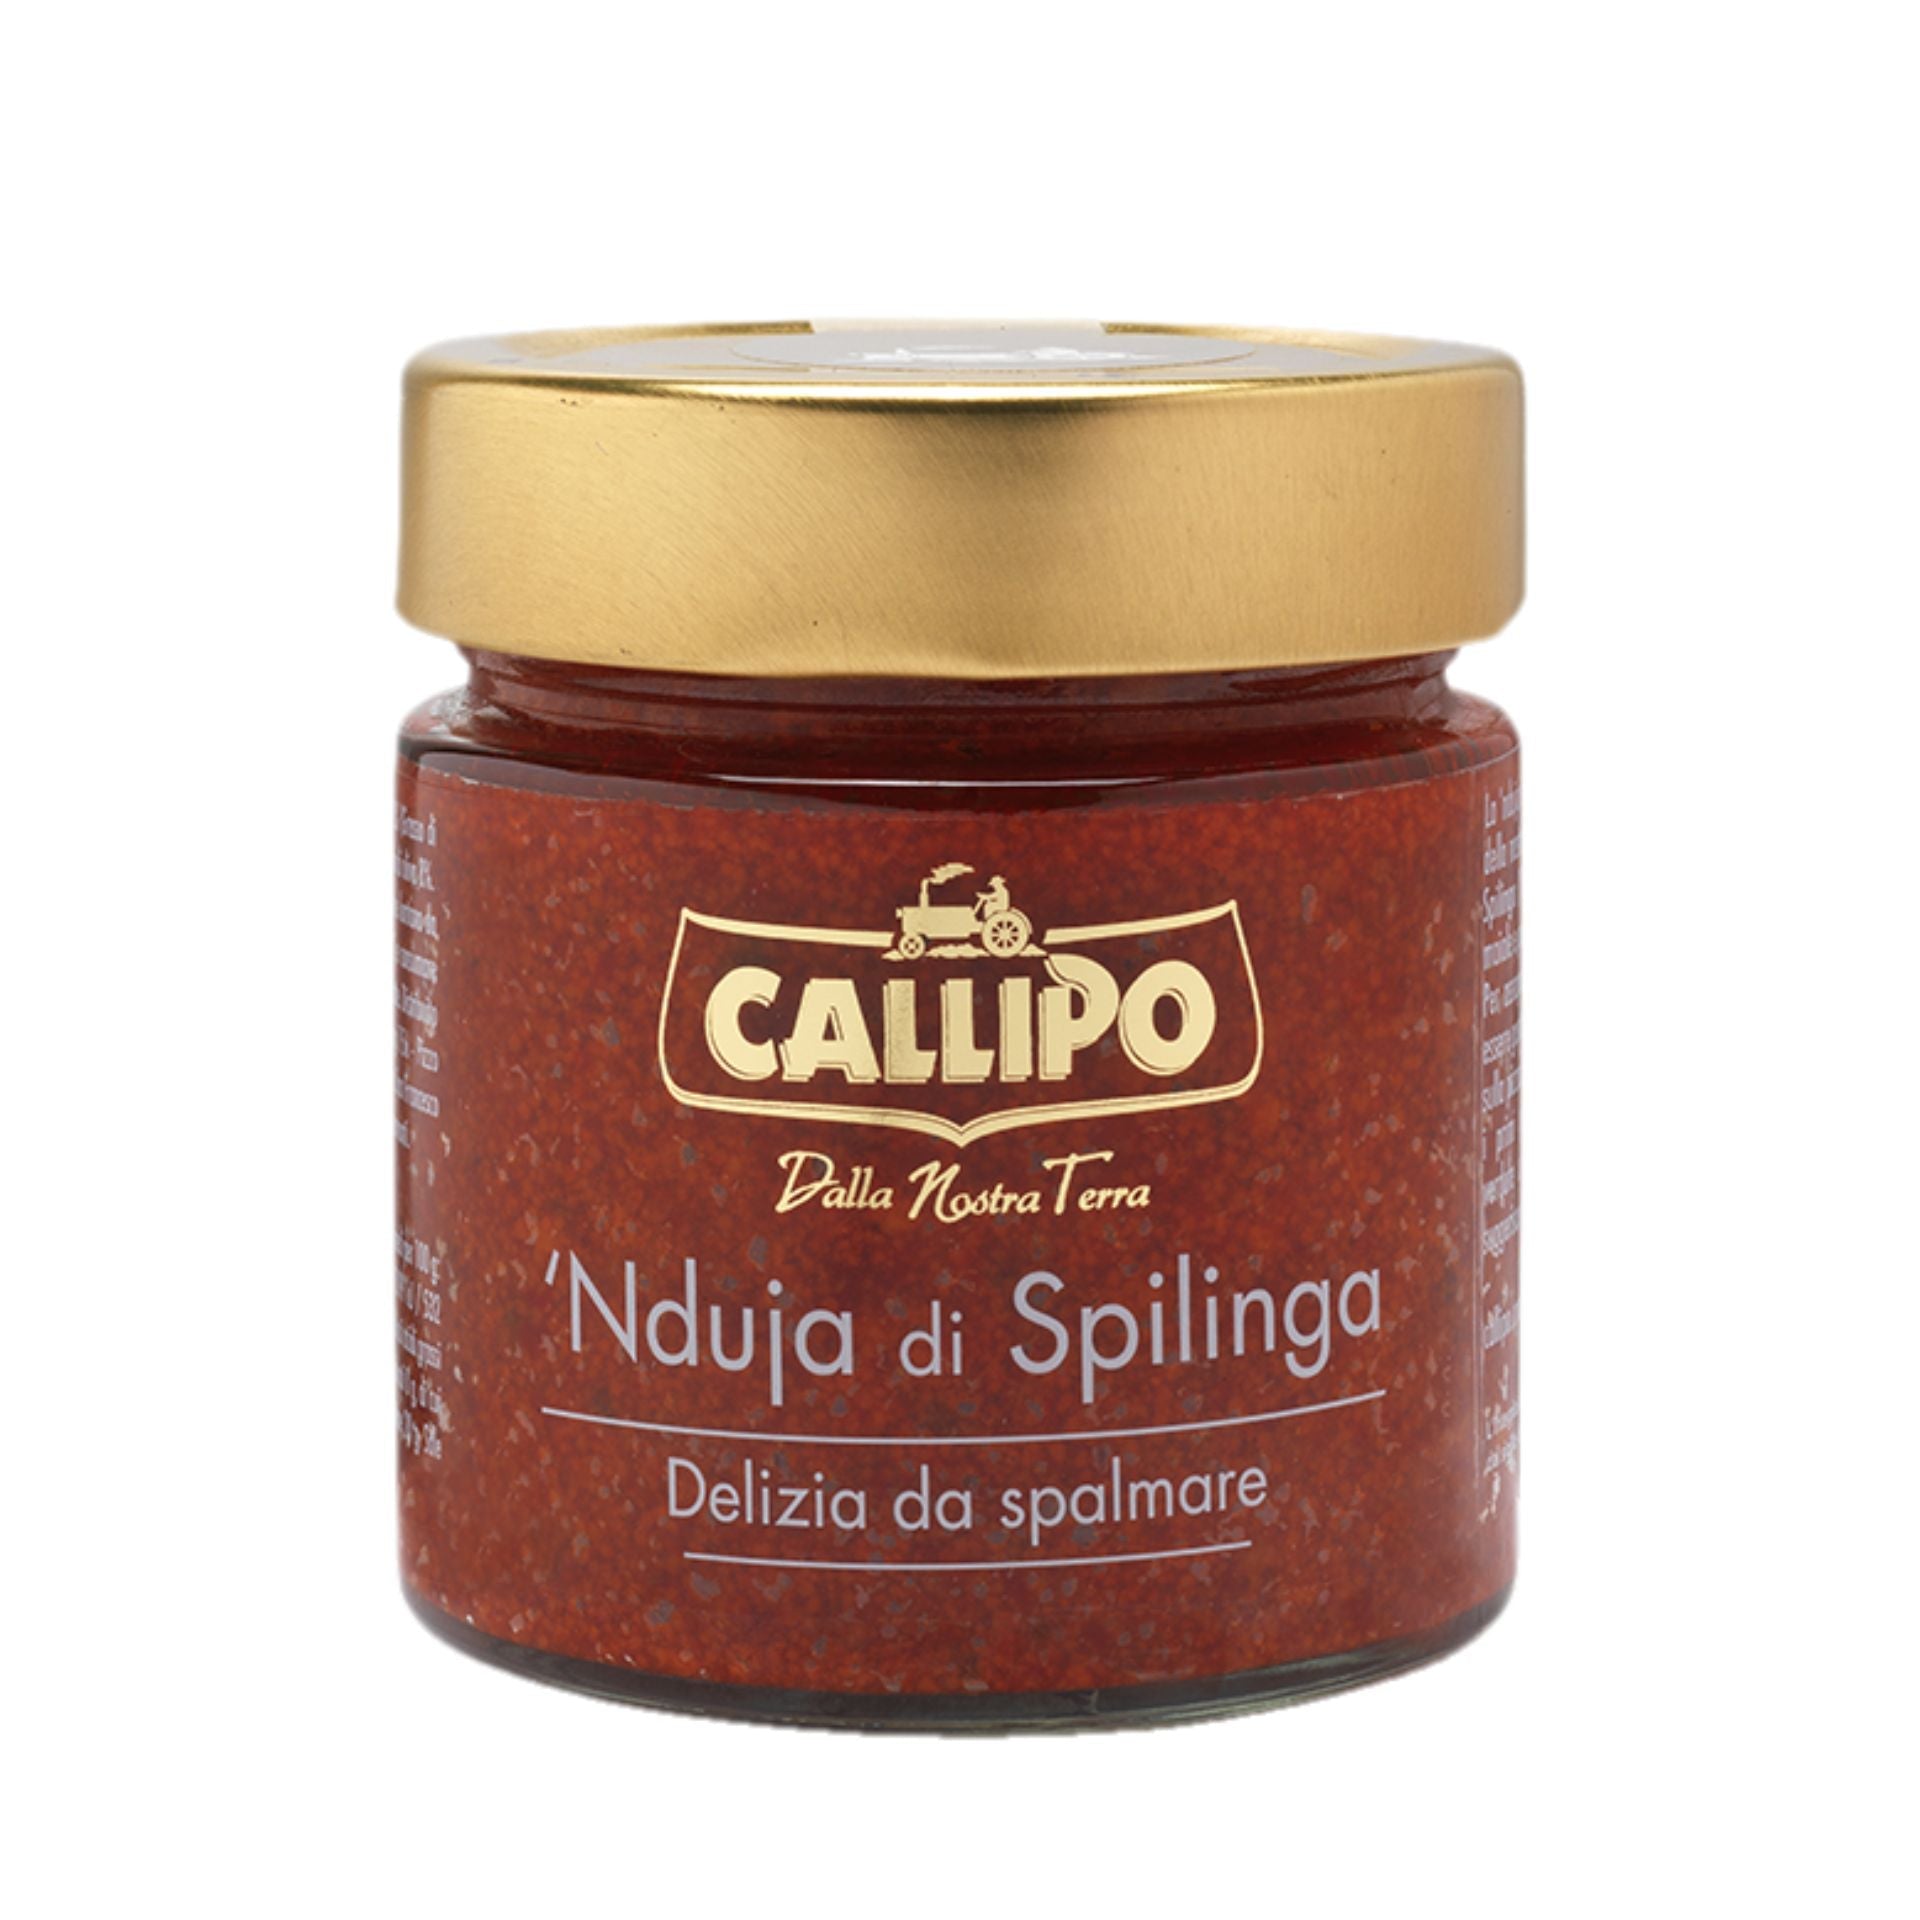 Callipo Nduja 200g  | Imported and distributed in the UK by Just Gourmet Foods